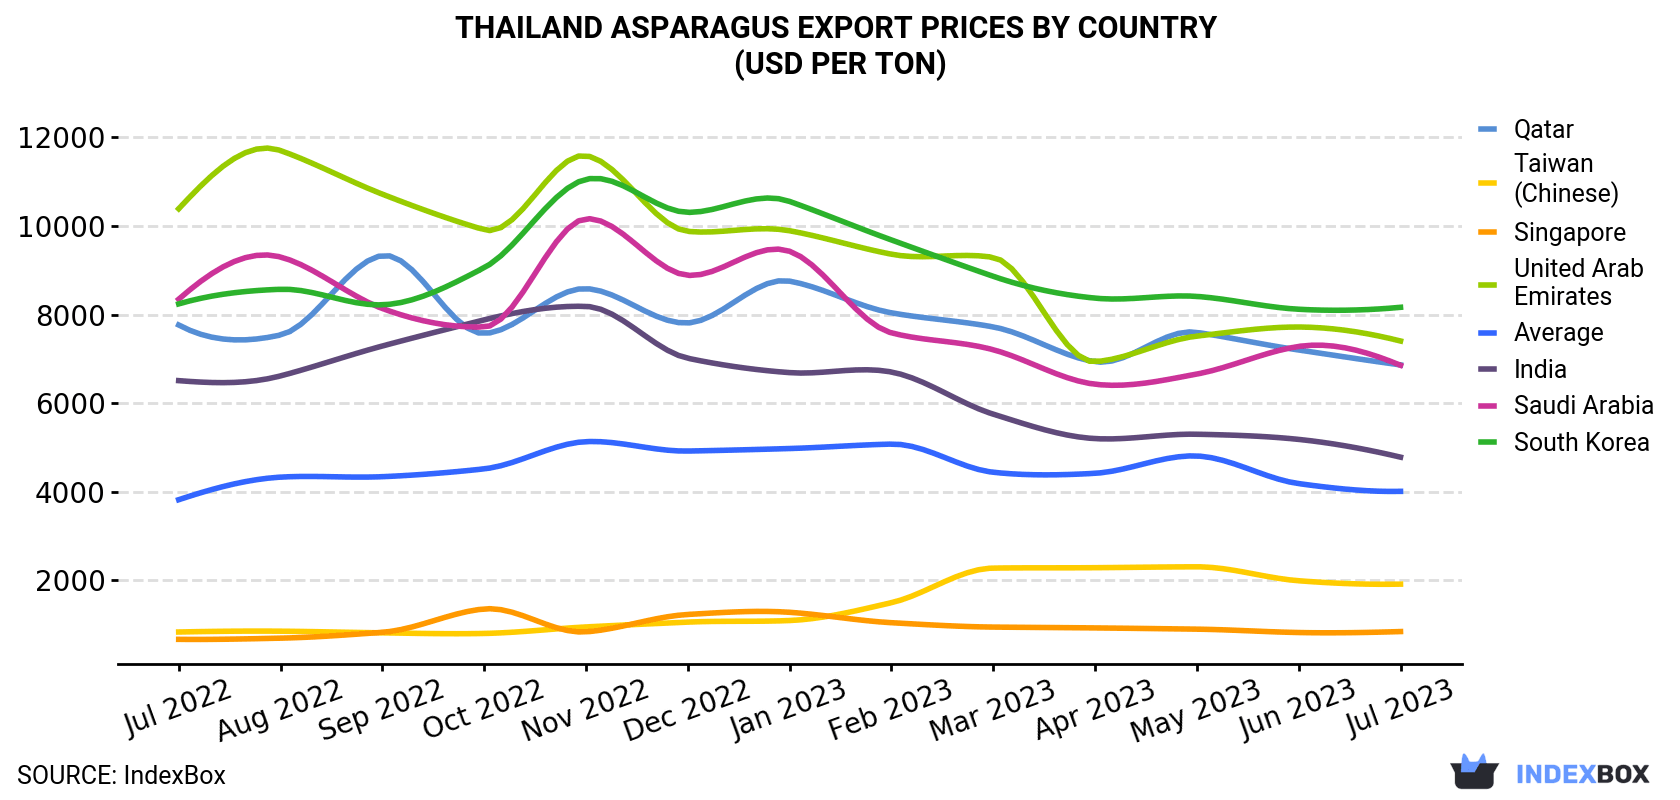 Thailand Asparagus Export Prices By Country (USD Per Ton)